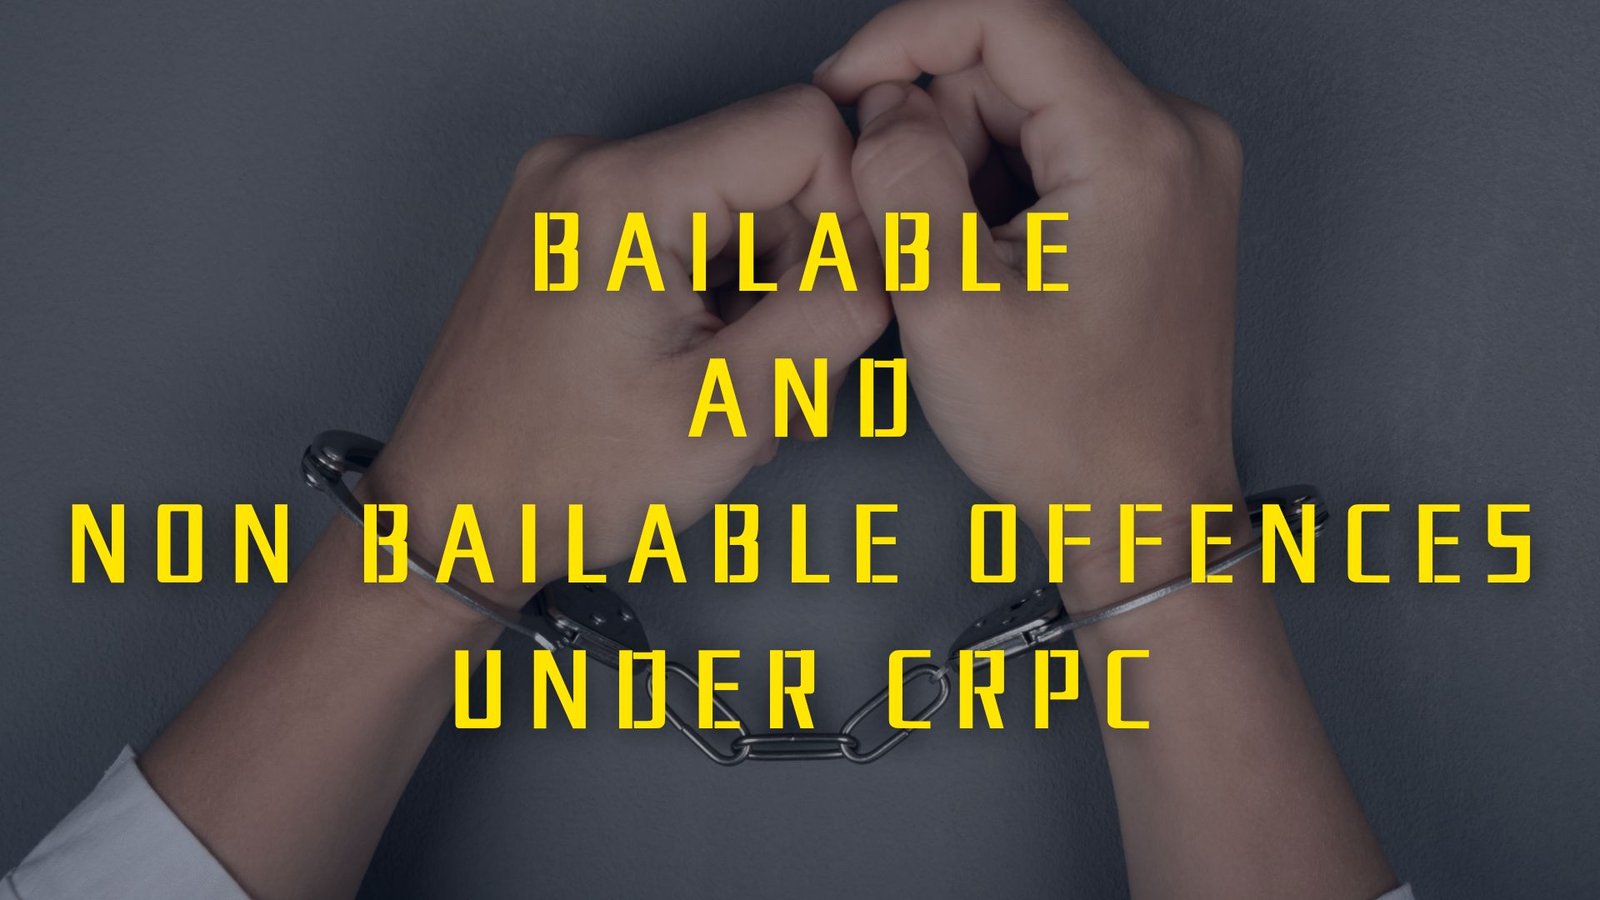 Bailable and Non Bailable Offences Under CrPC, Lawforeverything